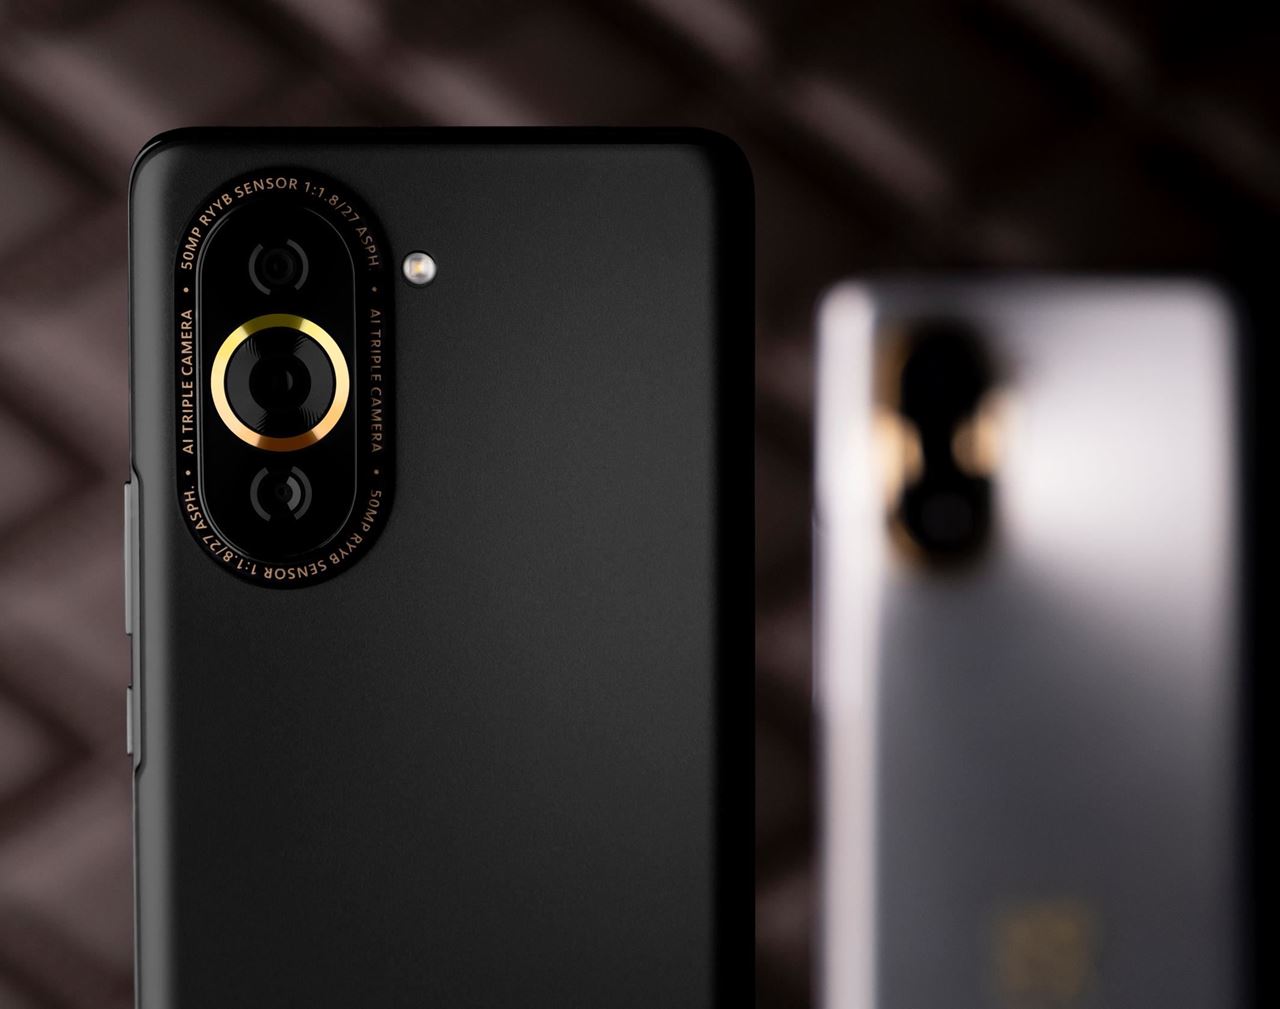 With many industry-firsts, the nova 10 Pro’s front camera takes your selfies to new levels